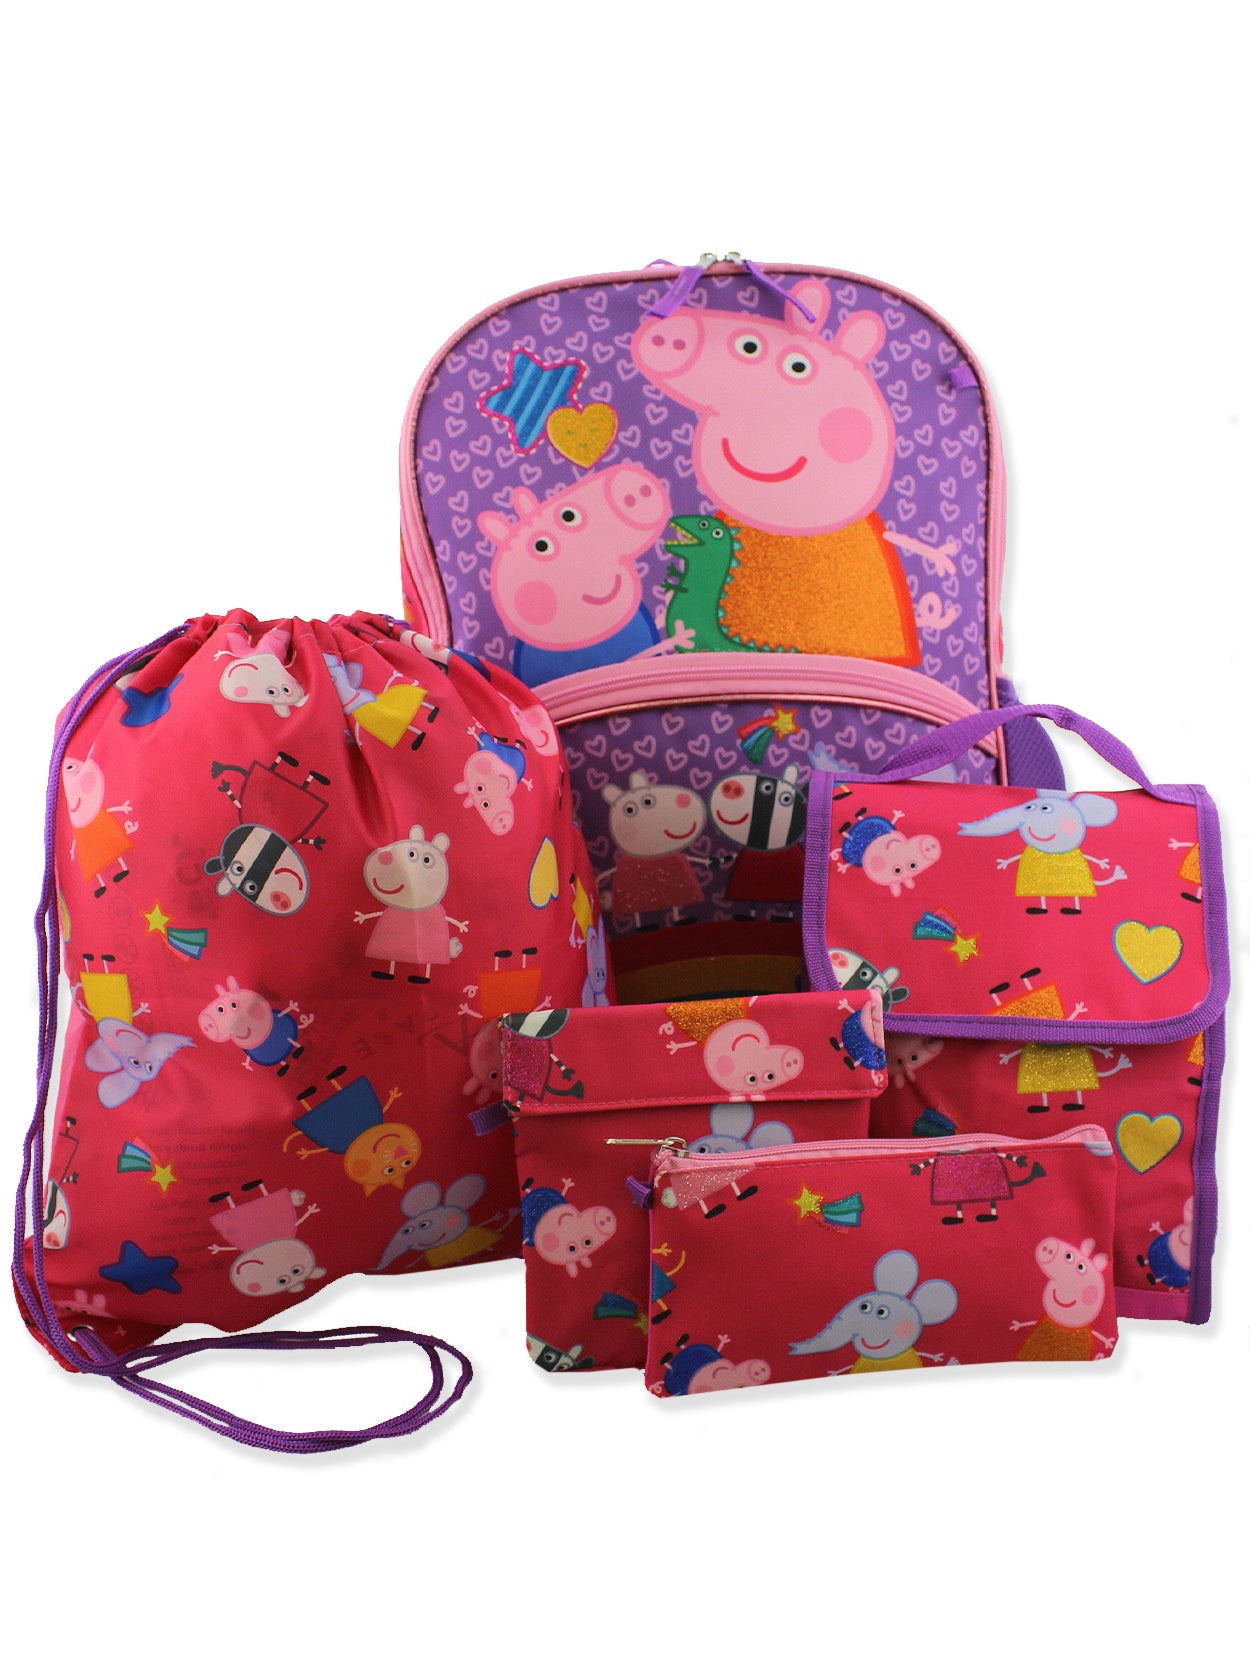 Screen Legends Peppa Pig Backpack and Lunch Box Set - Bundle with 15 Peppa  Pig Backpack, Lunch Bag, Tattoos, and More | Peppa Pig Backpack for Girls